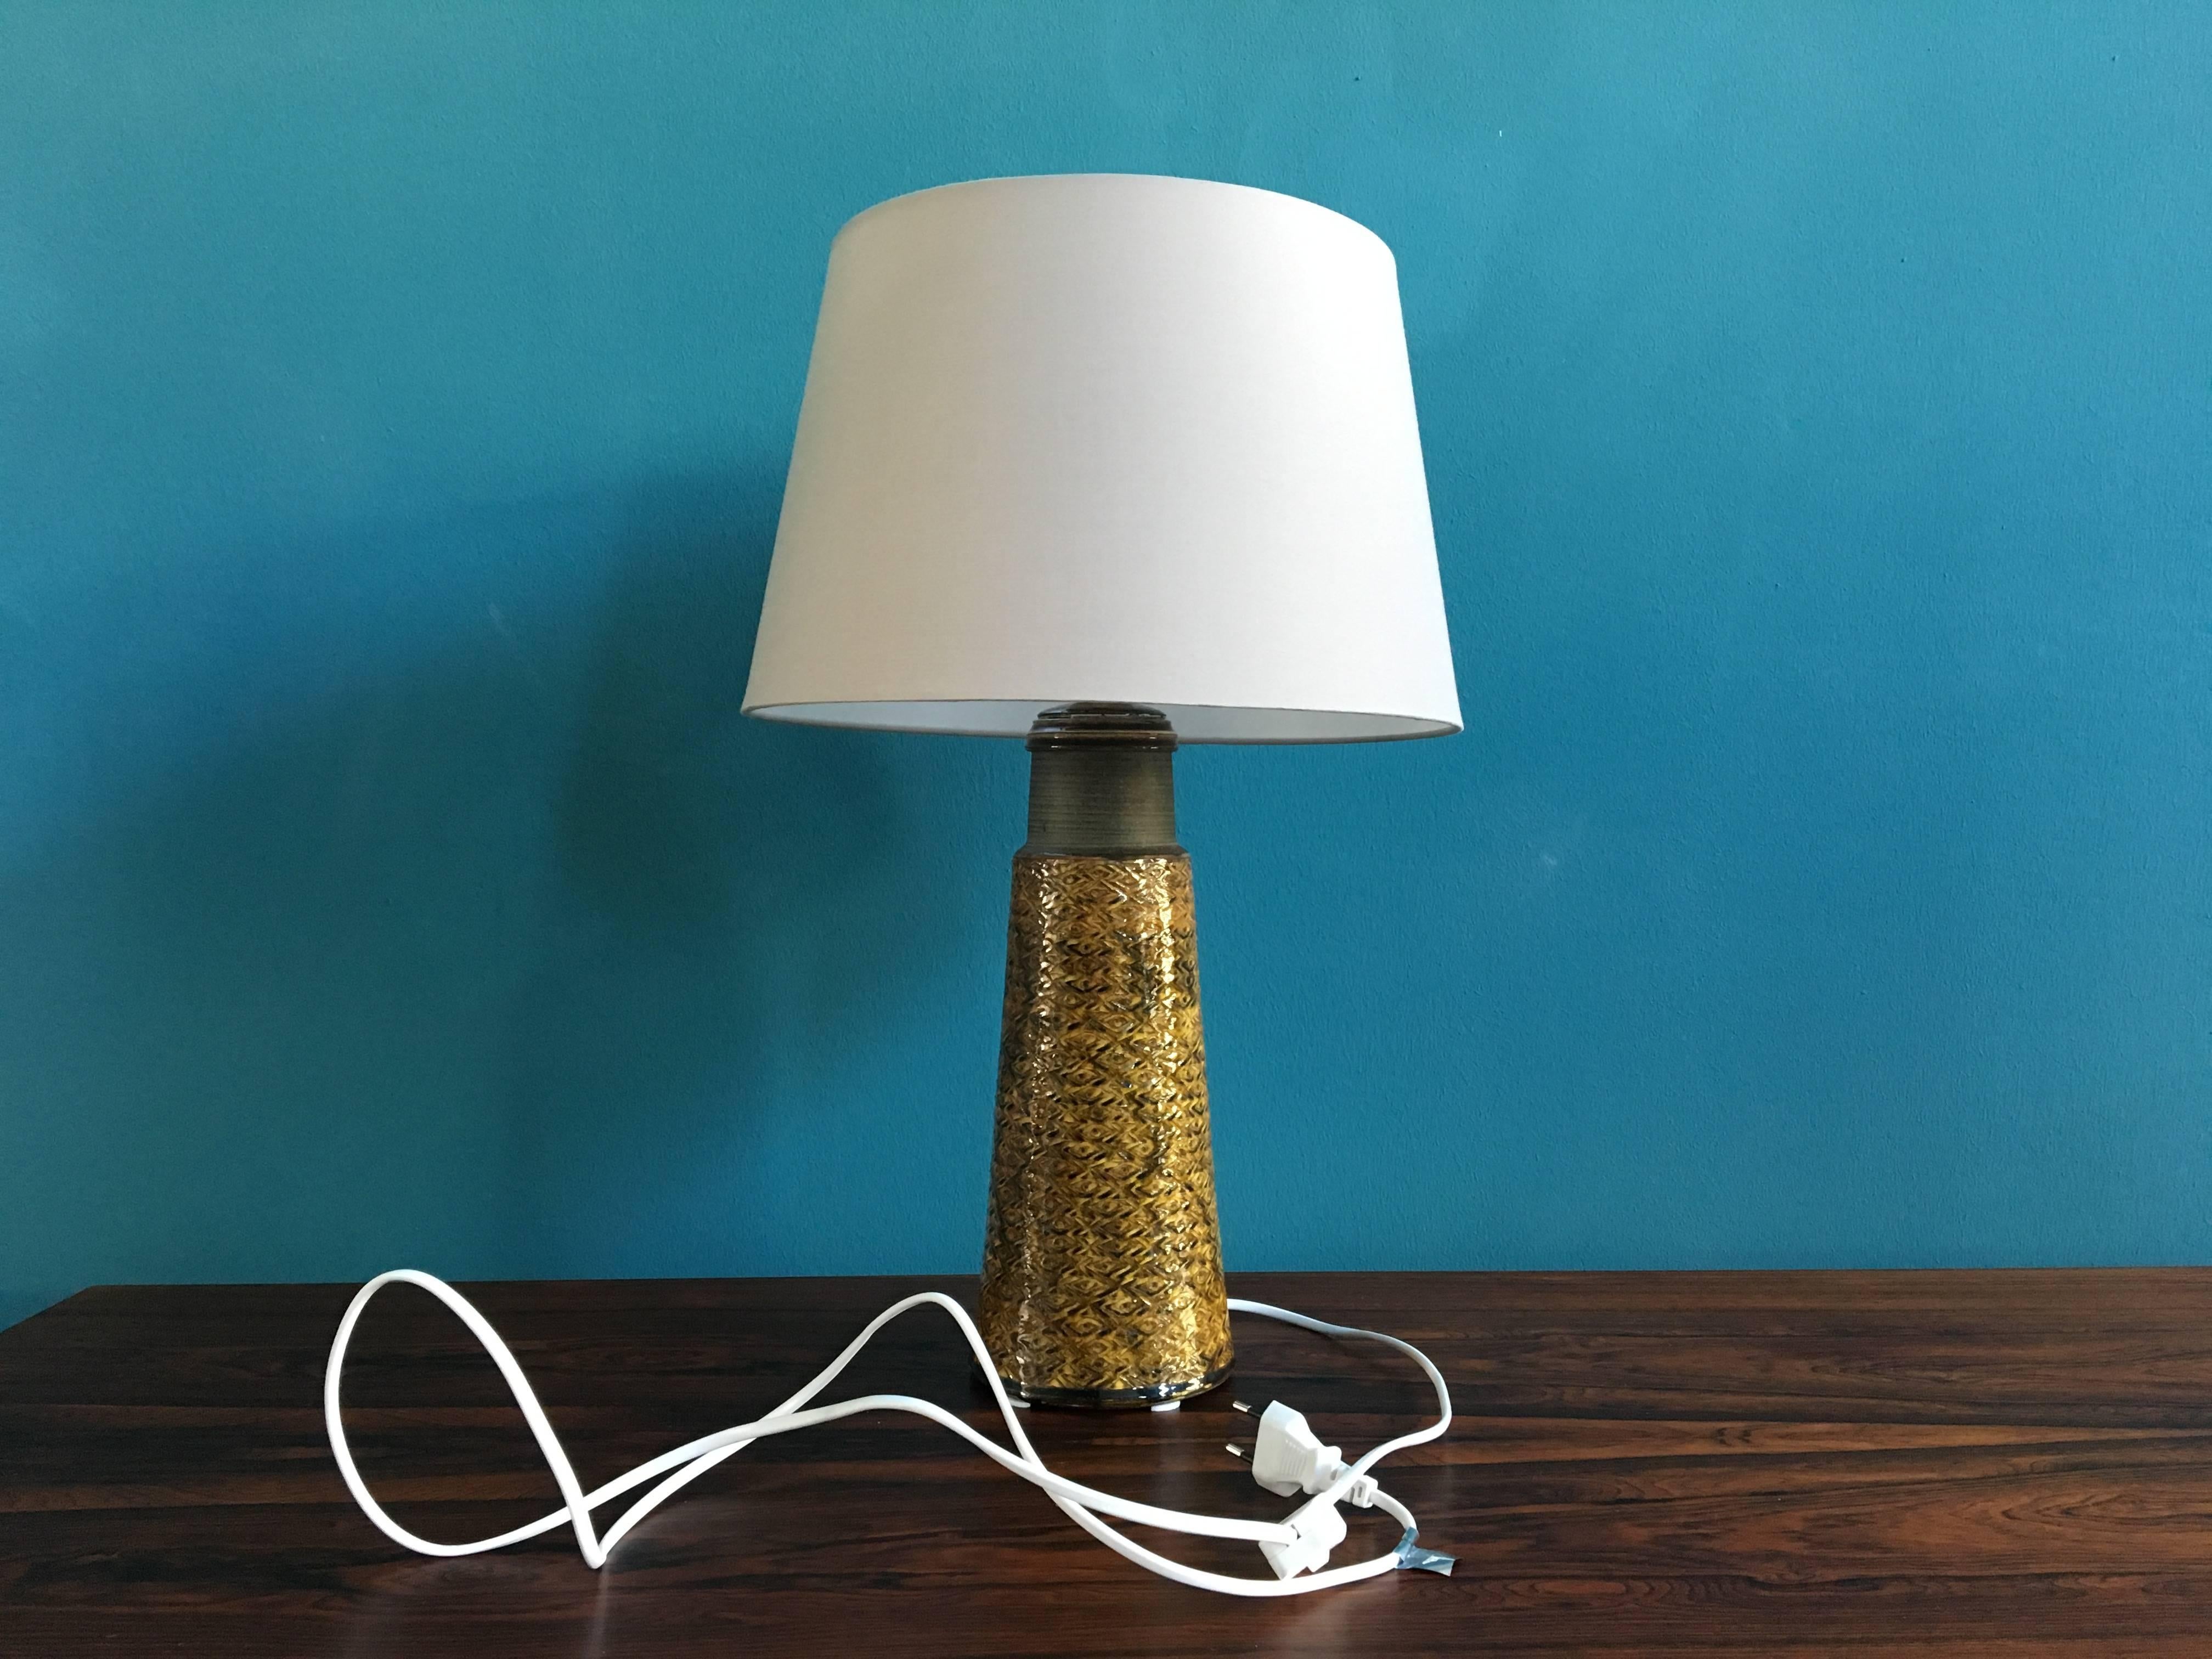 Mid-Century Modern Large Stoneware Table Lamp with Mustard Colored Glazing by Nils Kähler, Denmark